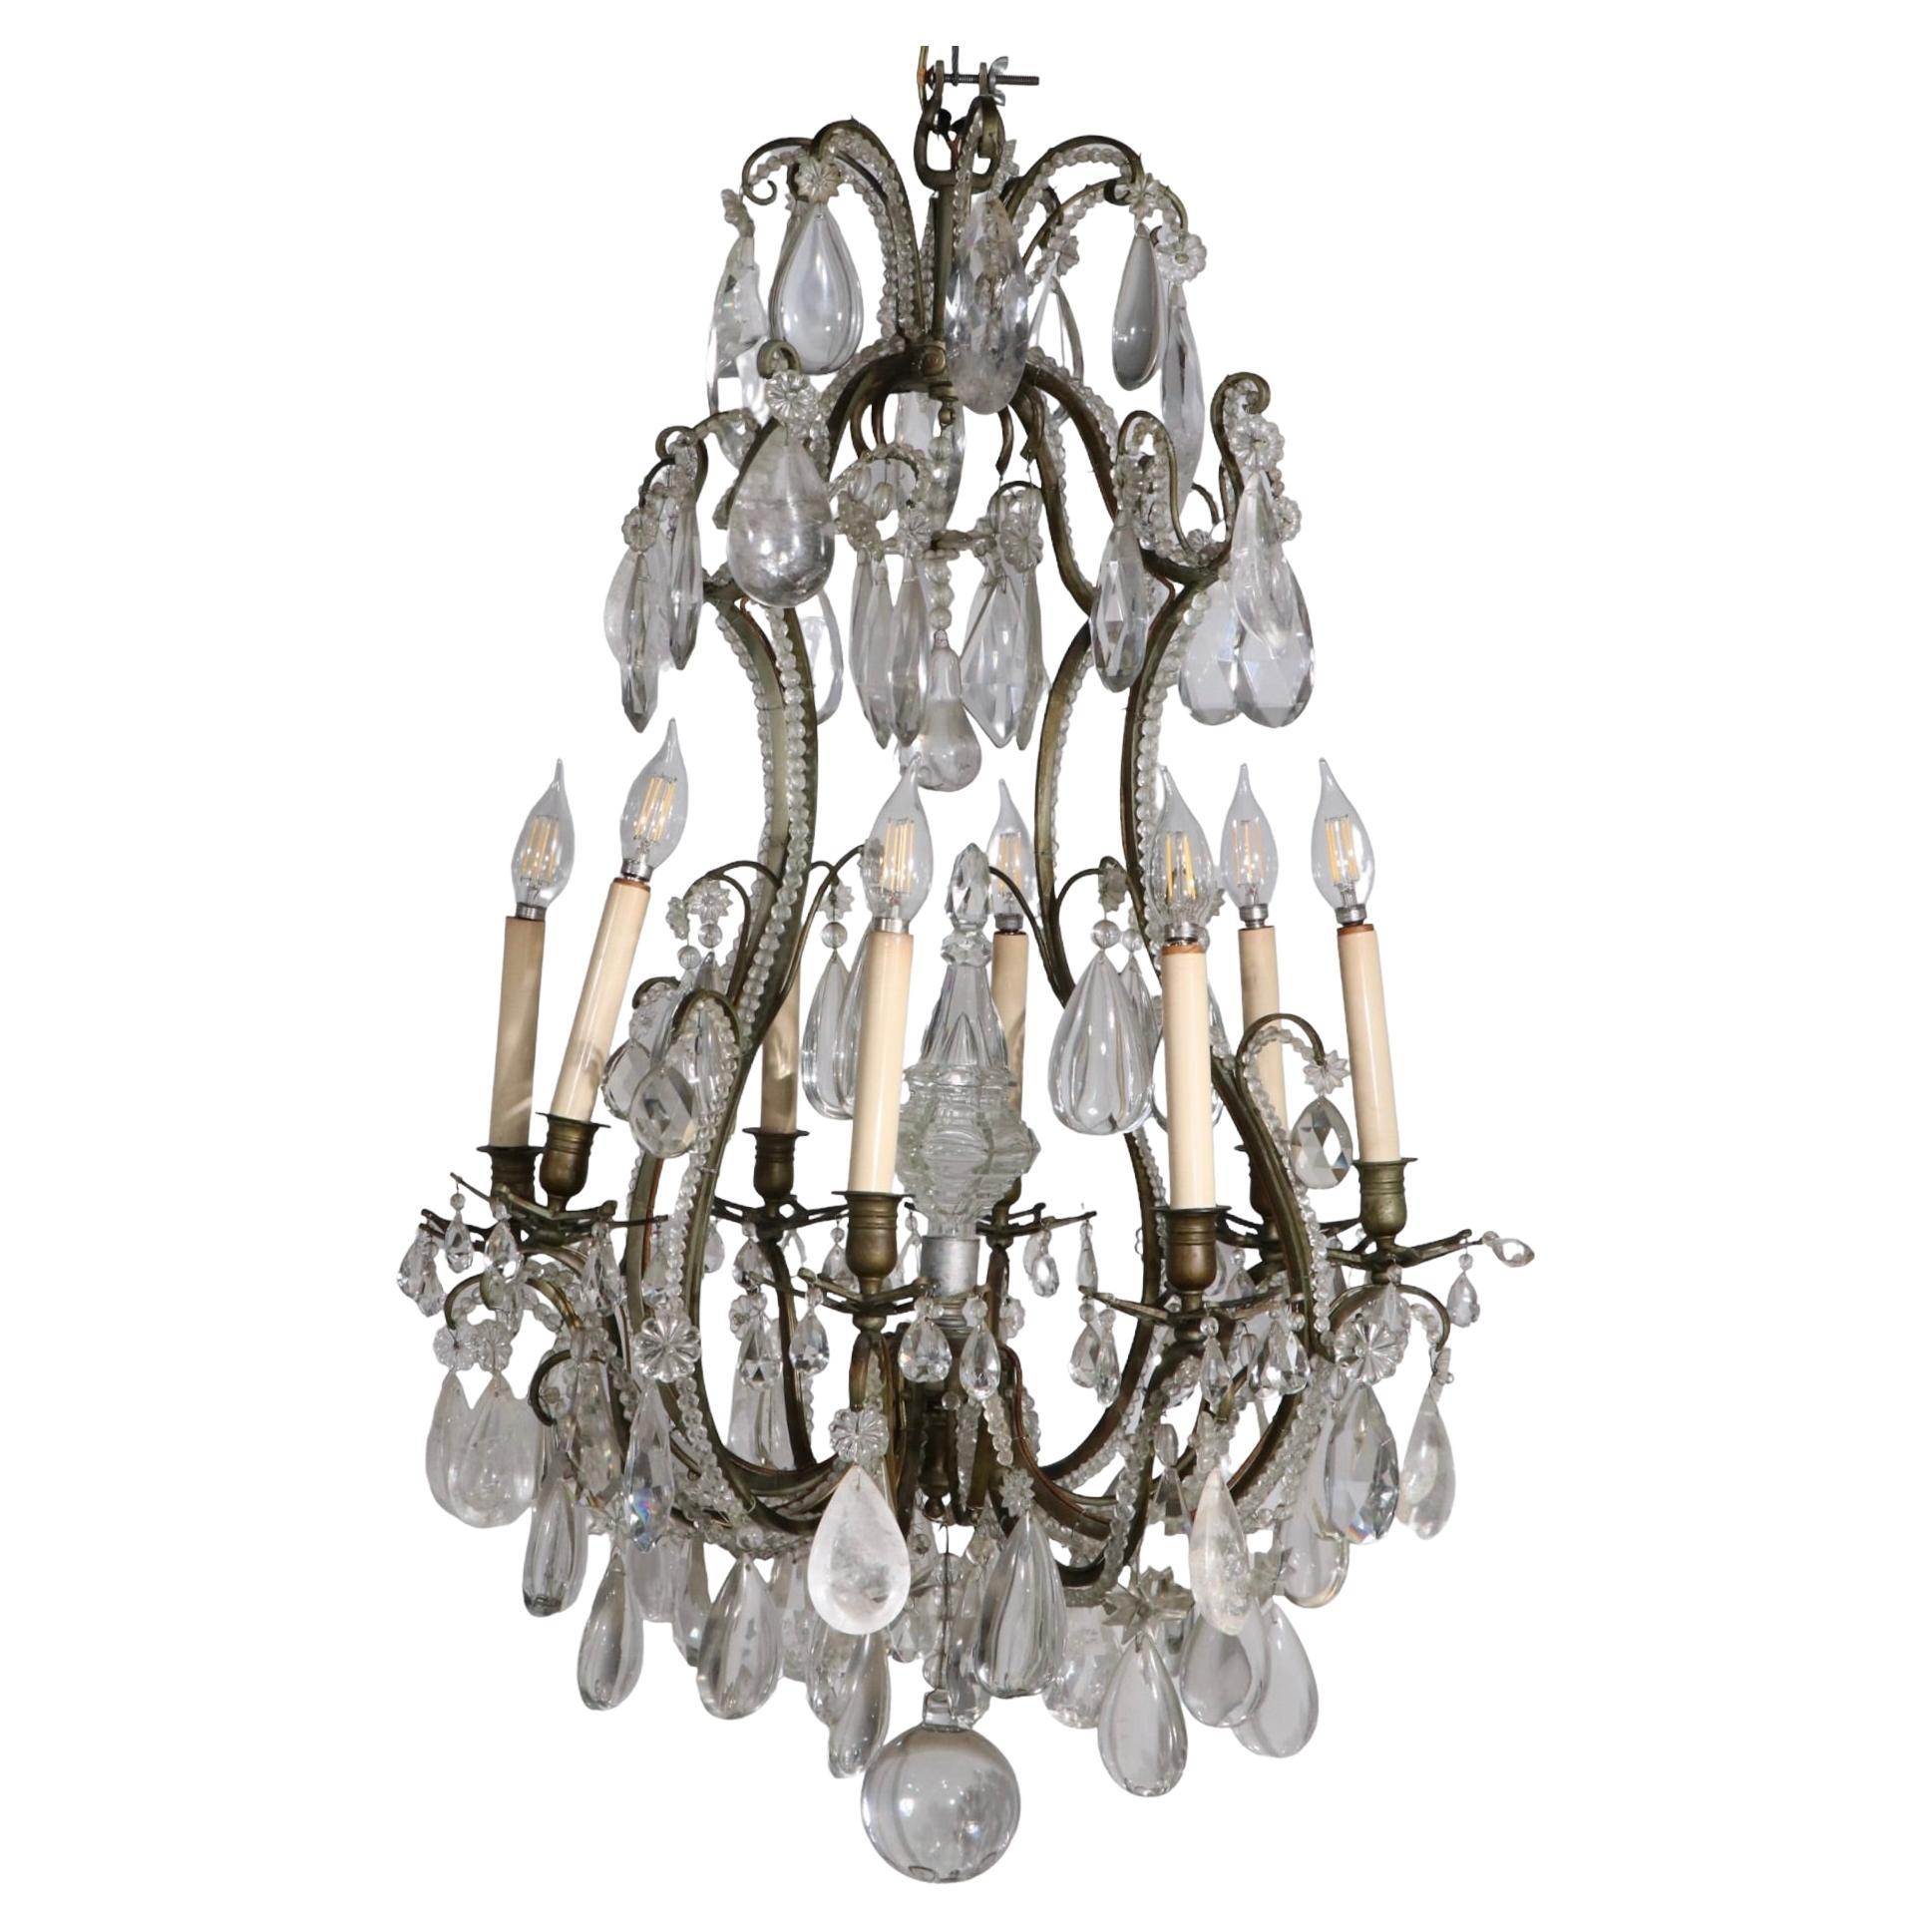 Formal Chandelier with Rock Crystal Drops by Charles J. Winston For Sale